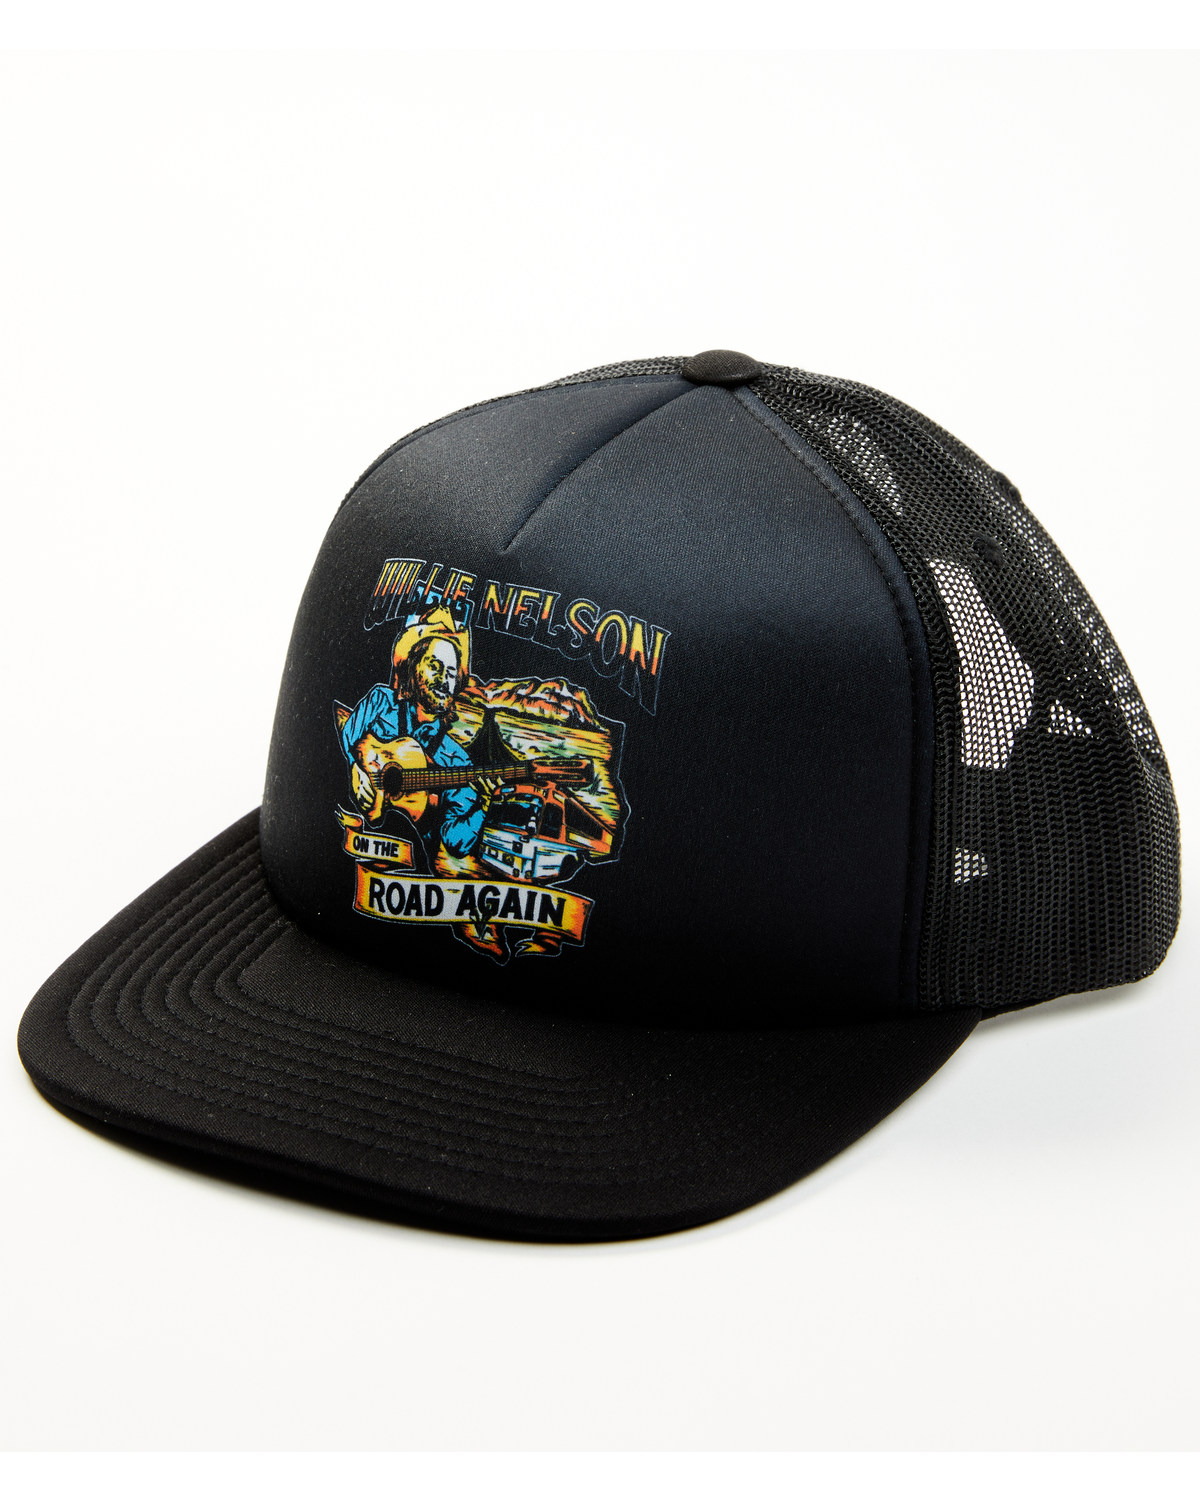 Brixton x Willie Nelson Men's On The Road Again Ball Cap